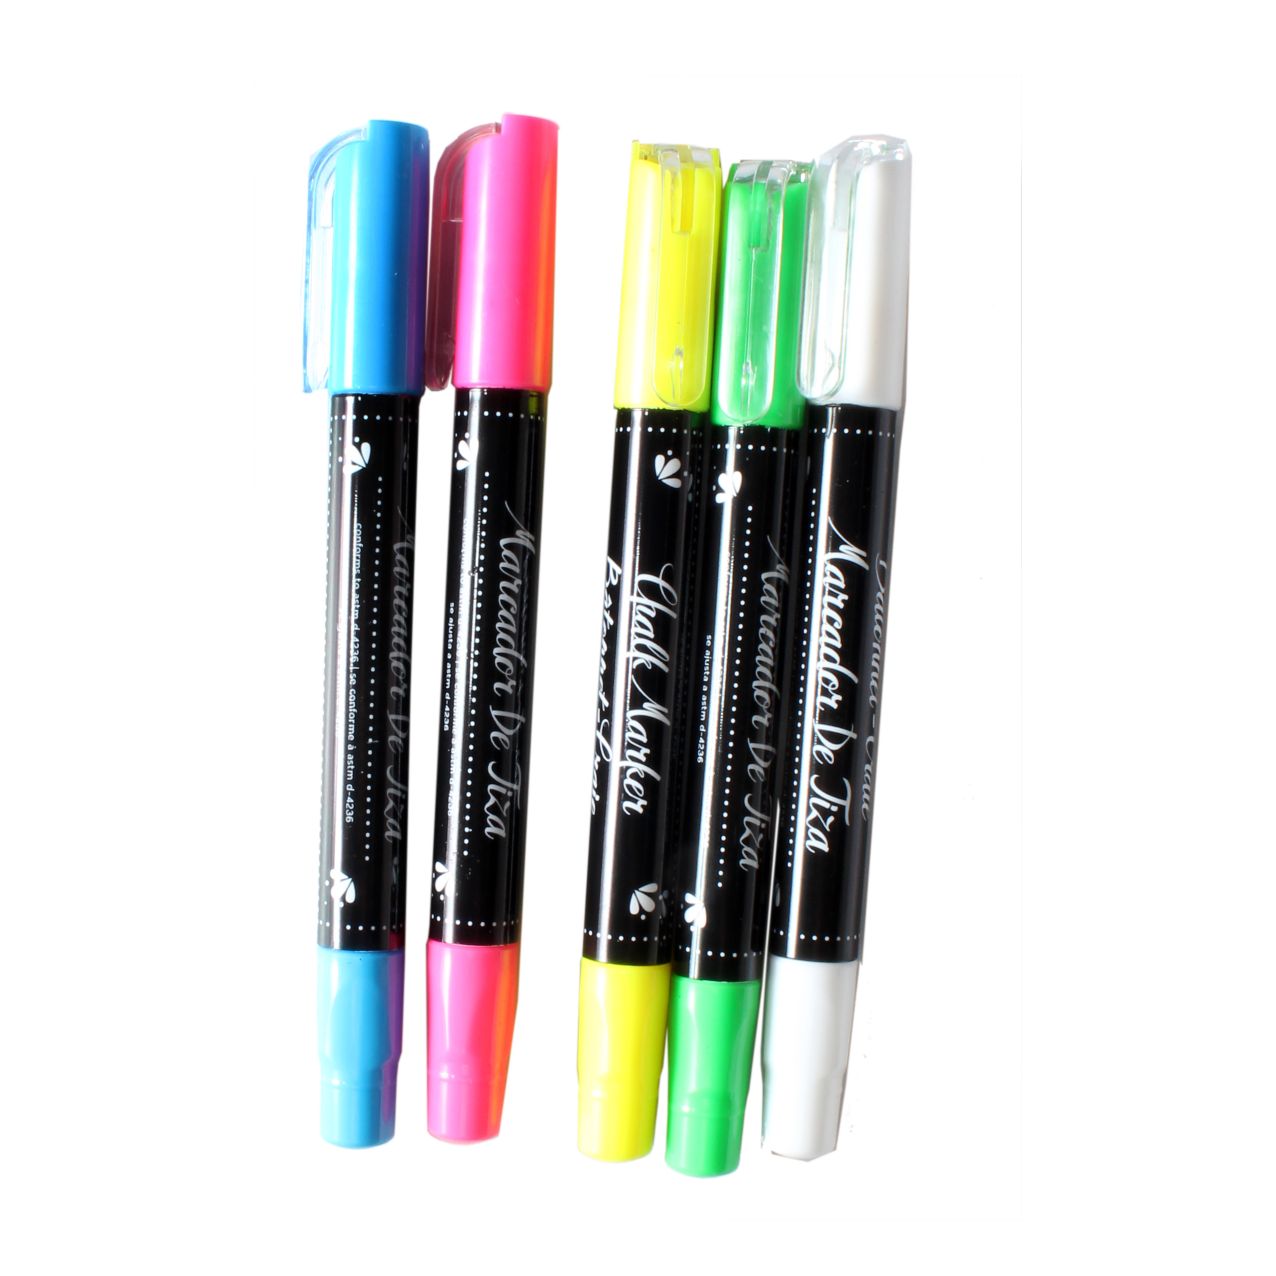 Erasable Chalk Markers Multi 369905 5Pcs in 1 Pack